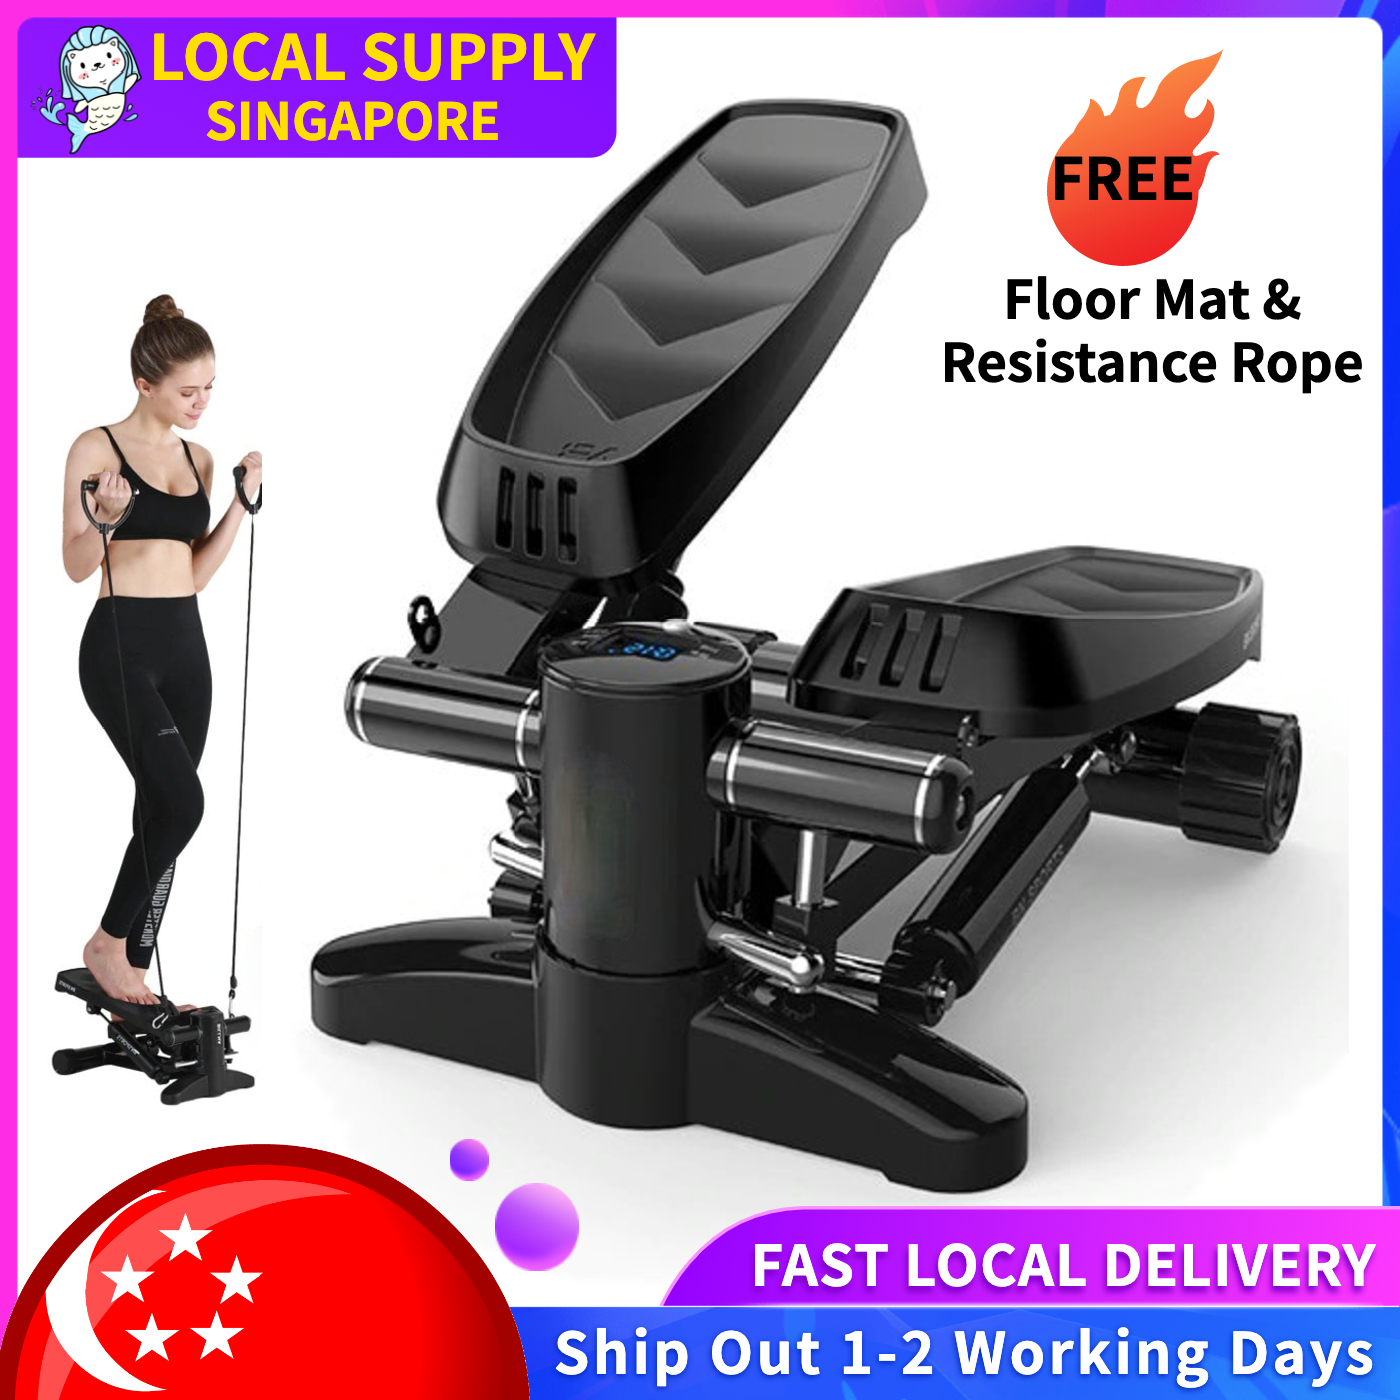 Small and Portable Cardio Machine Stair Stepper for Home Use Designed Fitness Equipment for Women and Men Mini Fitness Stepper for Exercise: Exercise Machine for Home Use 